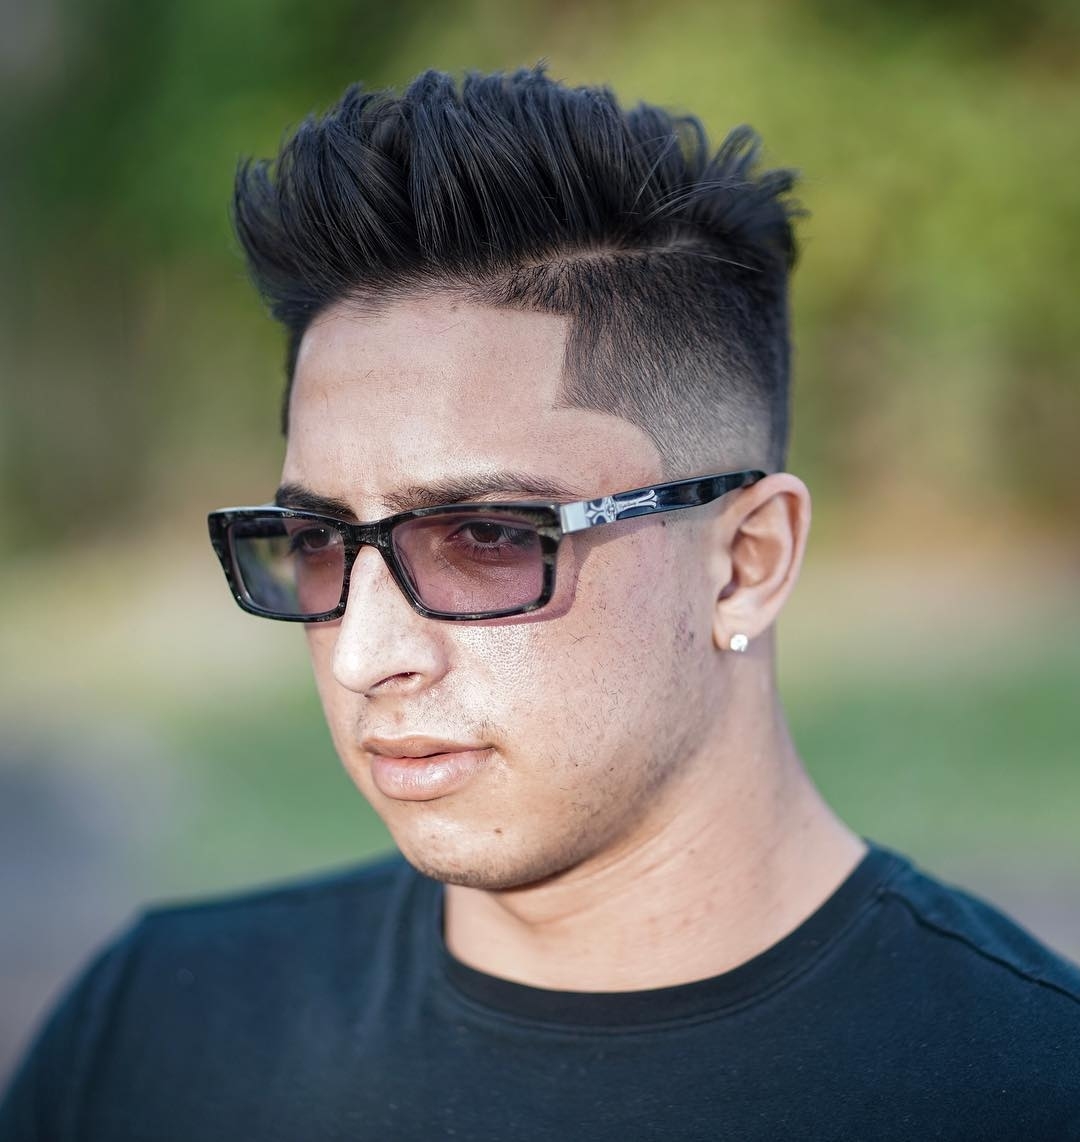 40 Favorite Haircuts For Men With Glasses: Find Your Perfect Style in Asian Hairstyle With Glasses